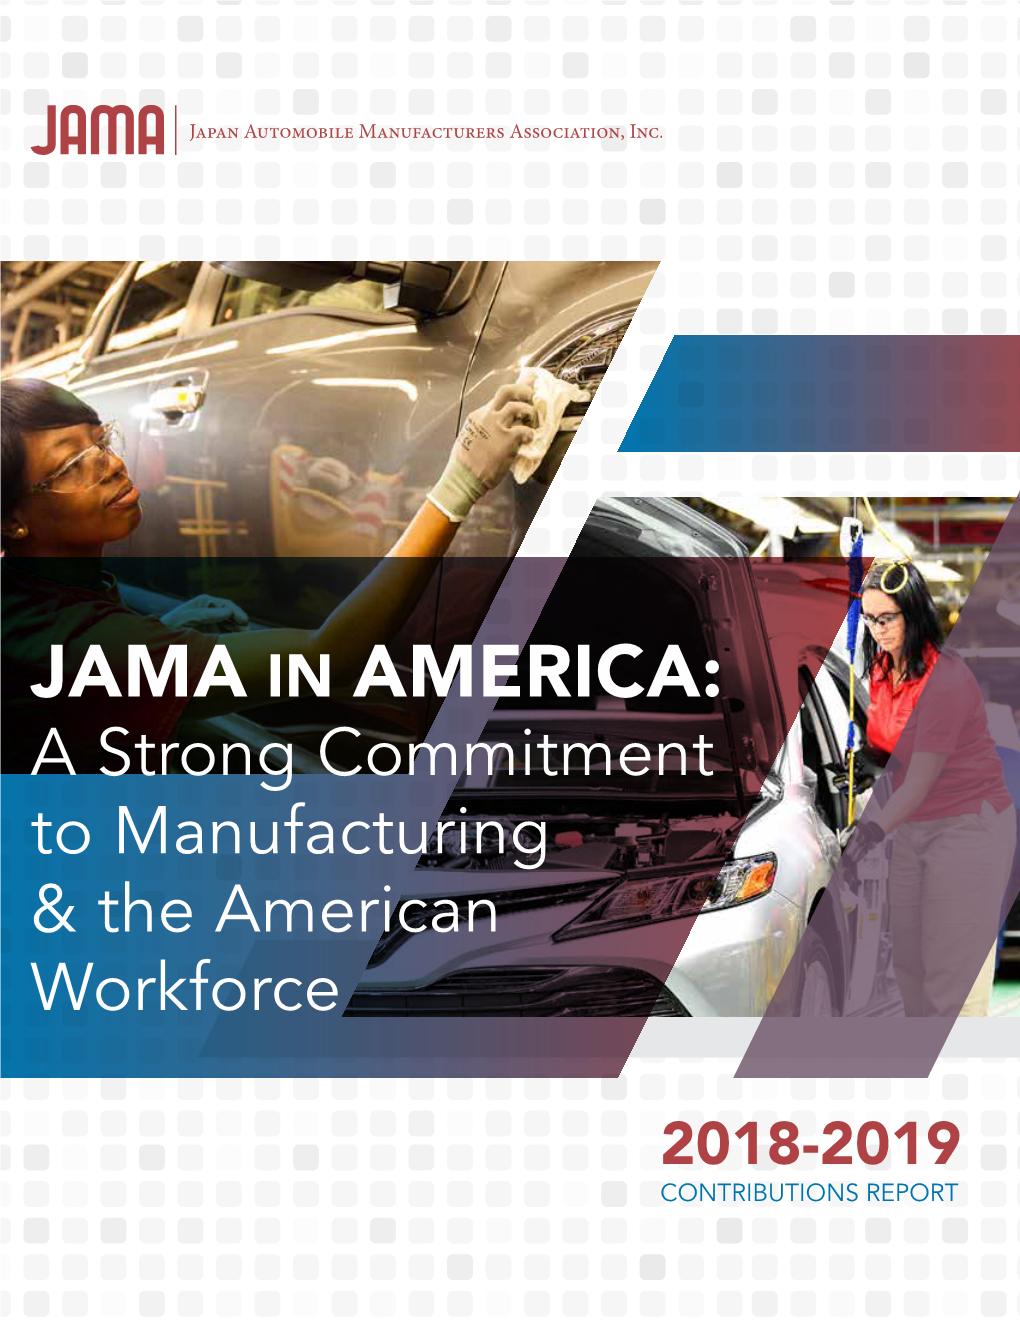 JAMA in AMERICA: a Strong Commitment to Manufacturing & the American Workforce